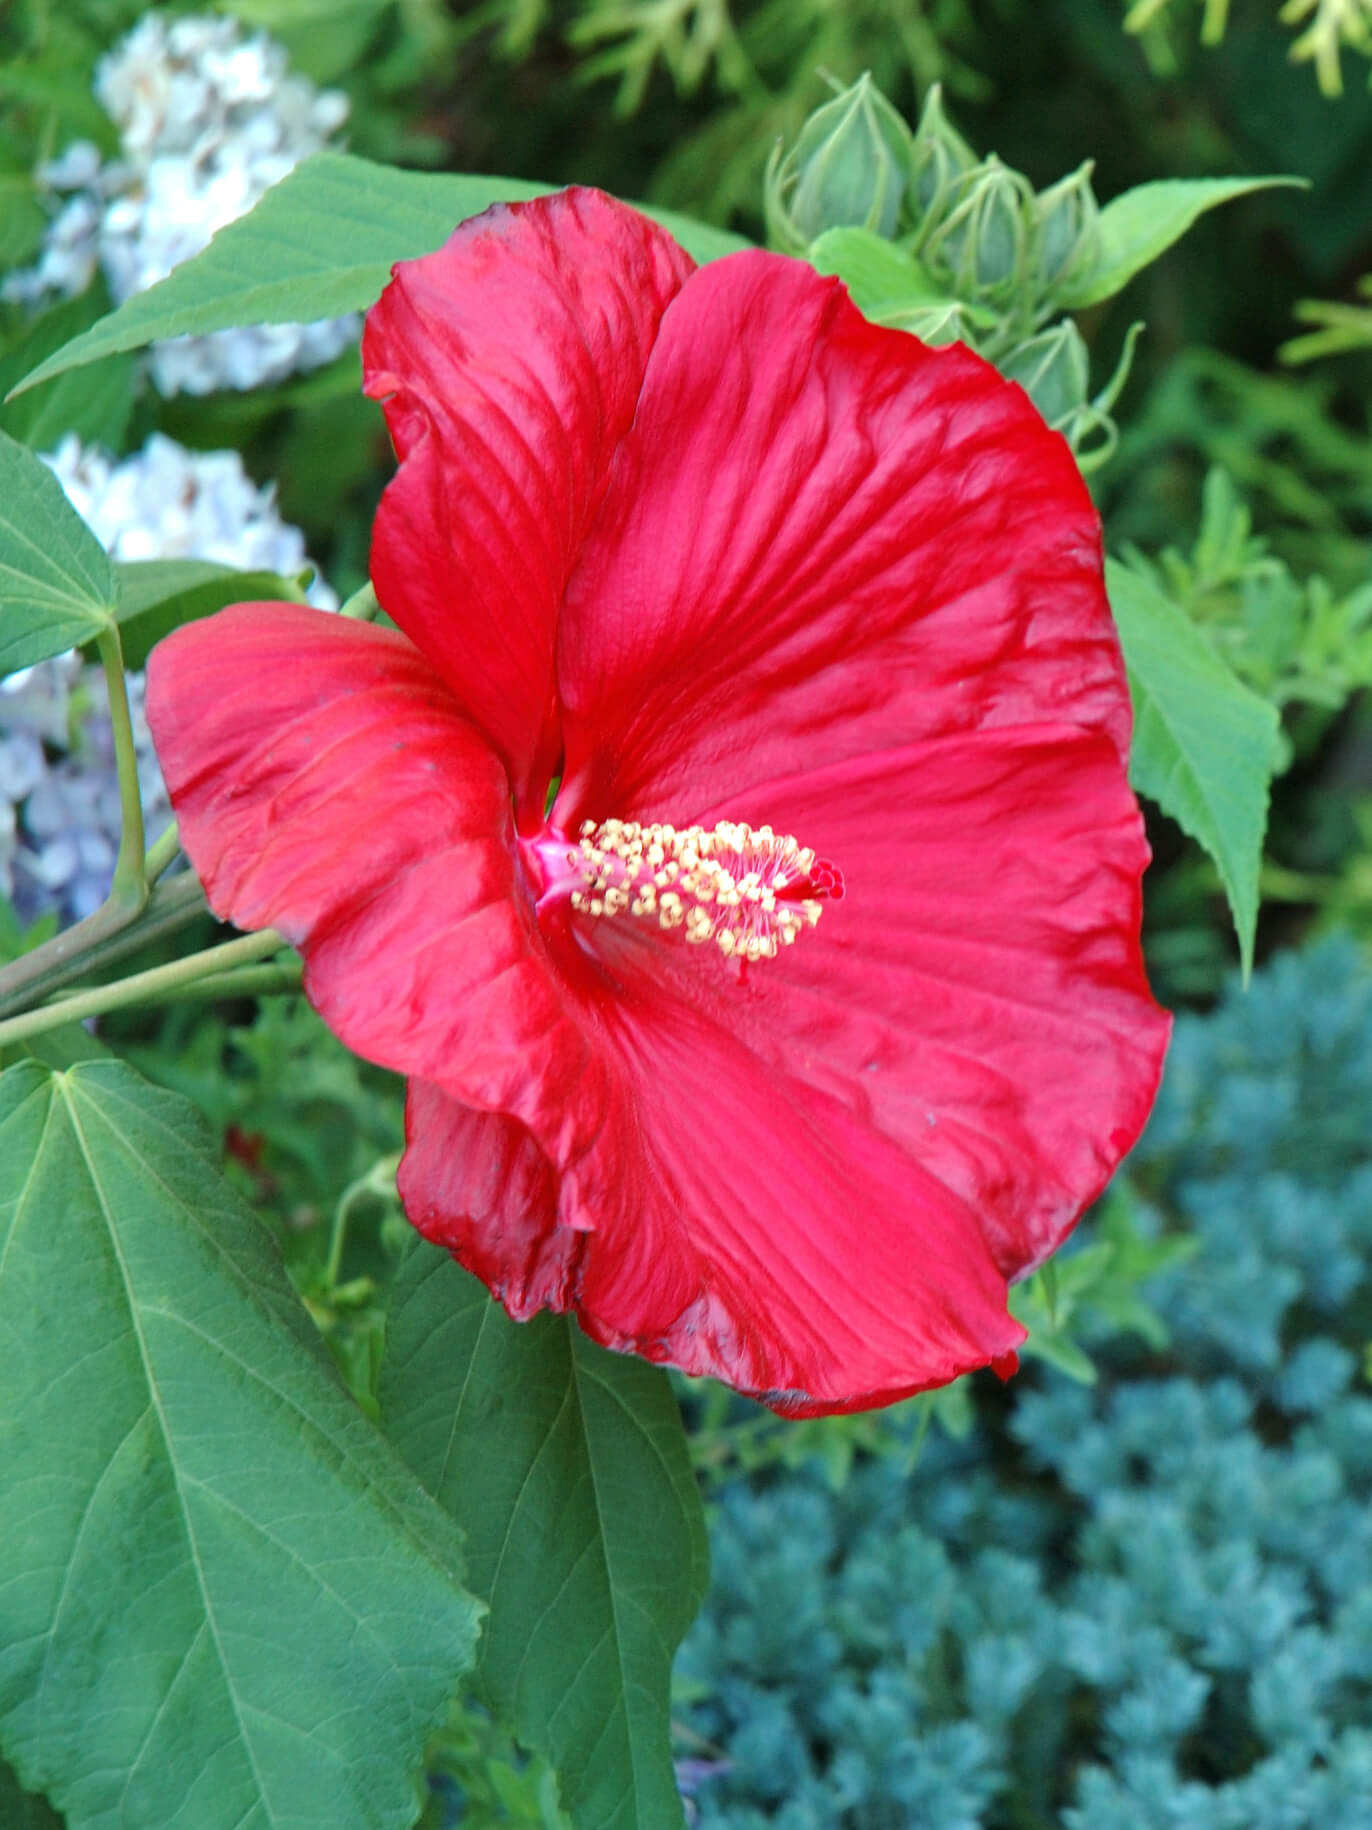 Hibiscus flowers are some of the largest in the warm, summer months.